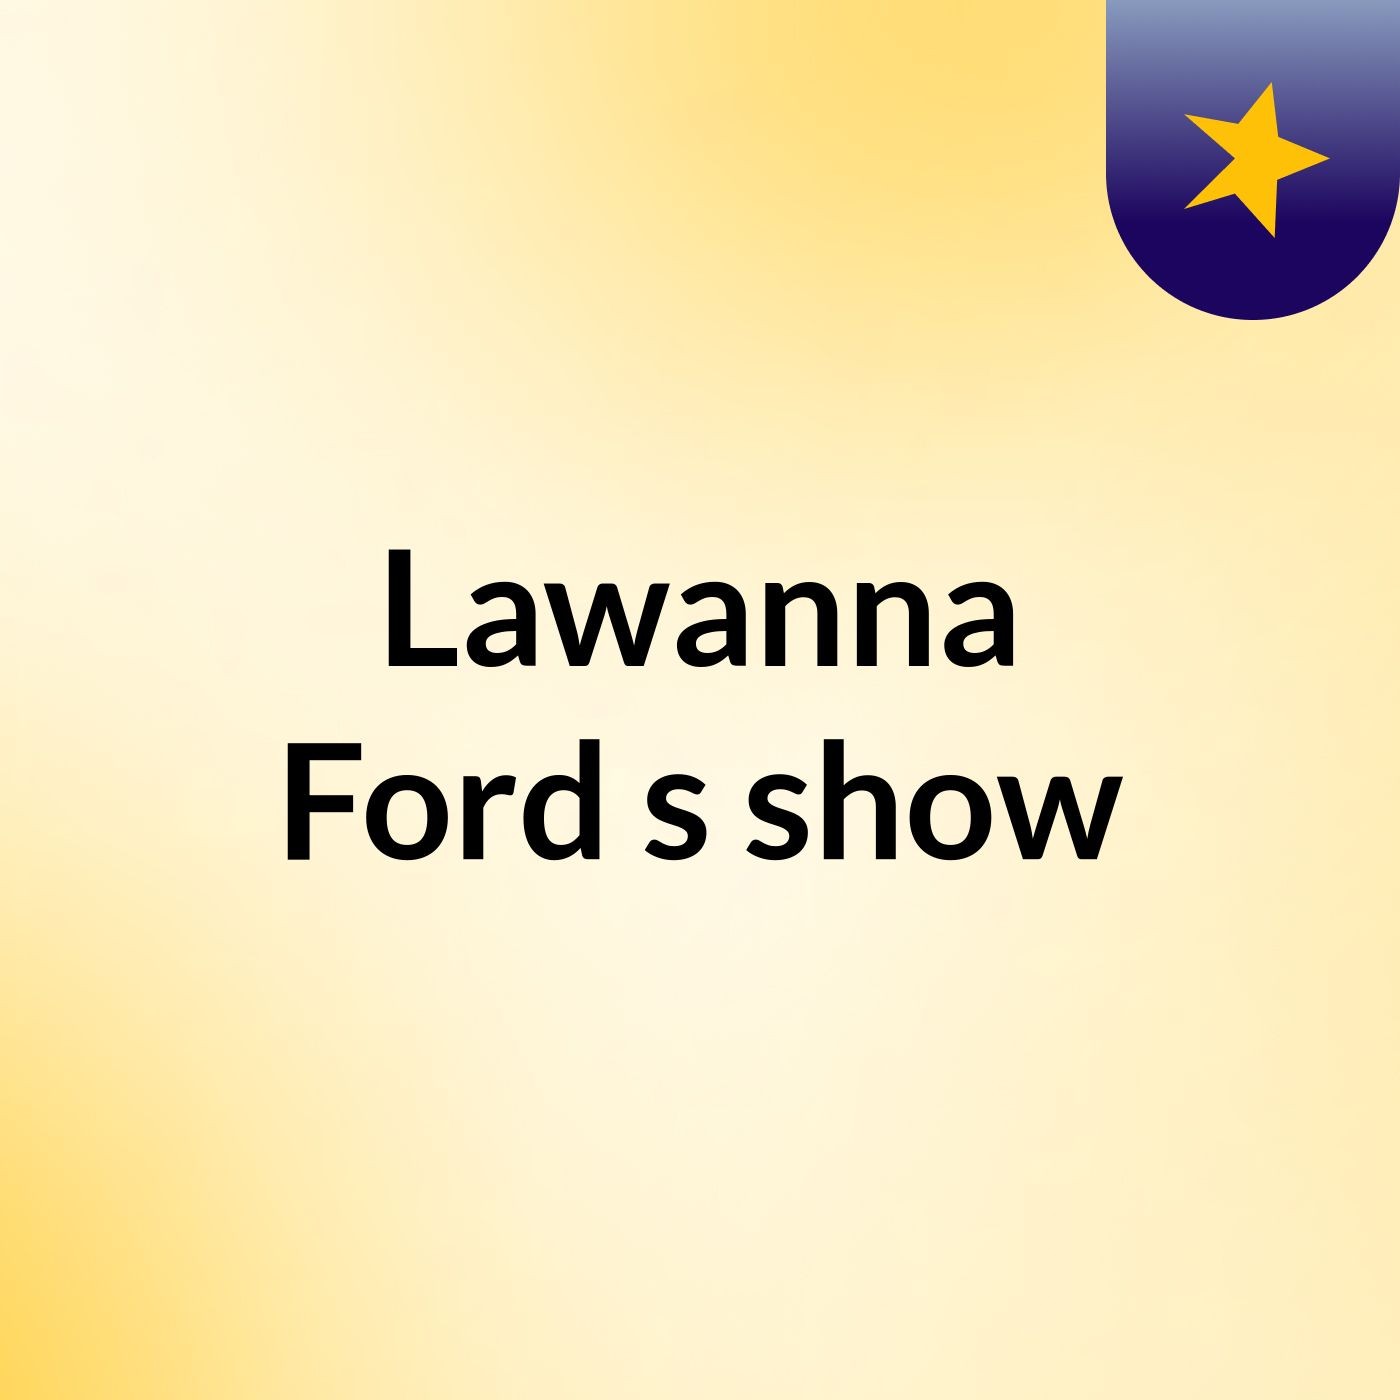 Lawanna Ford's show